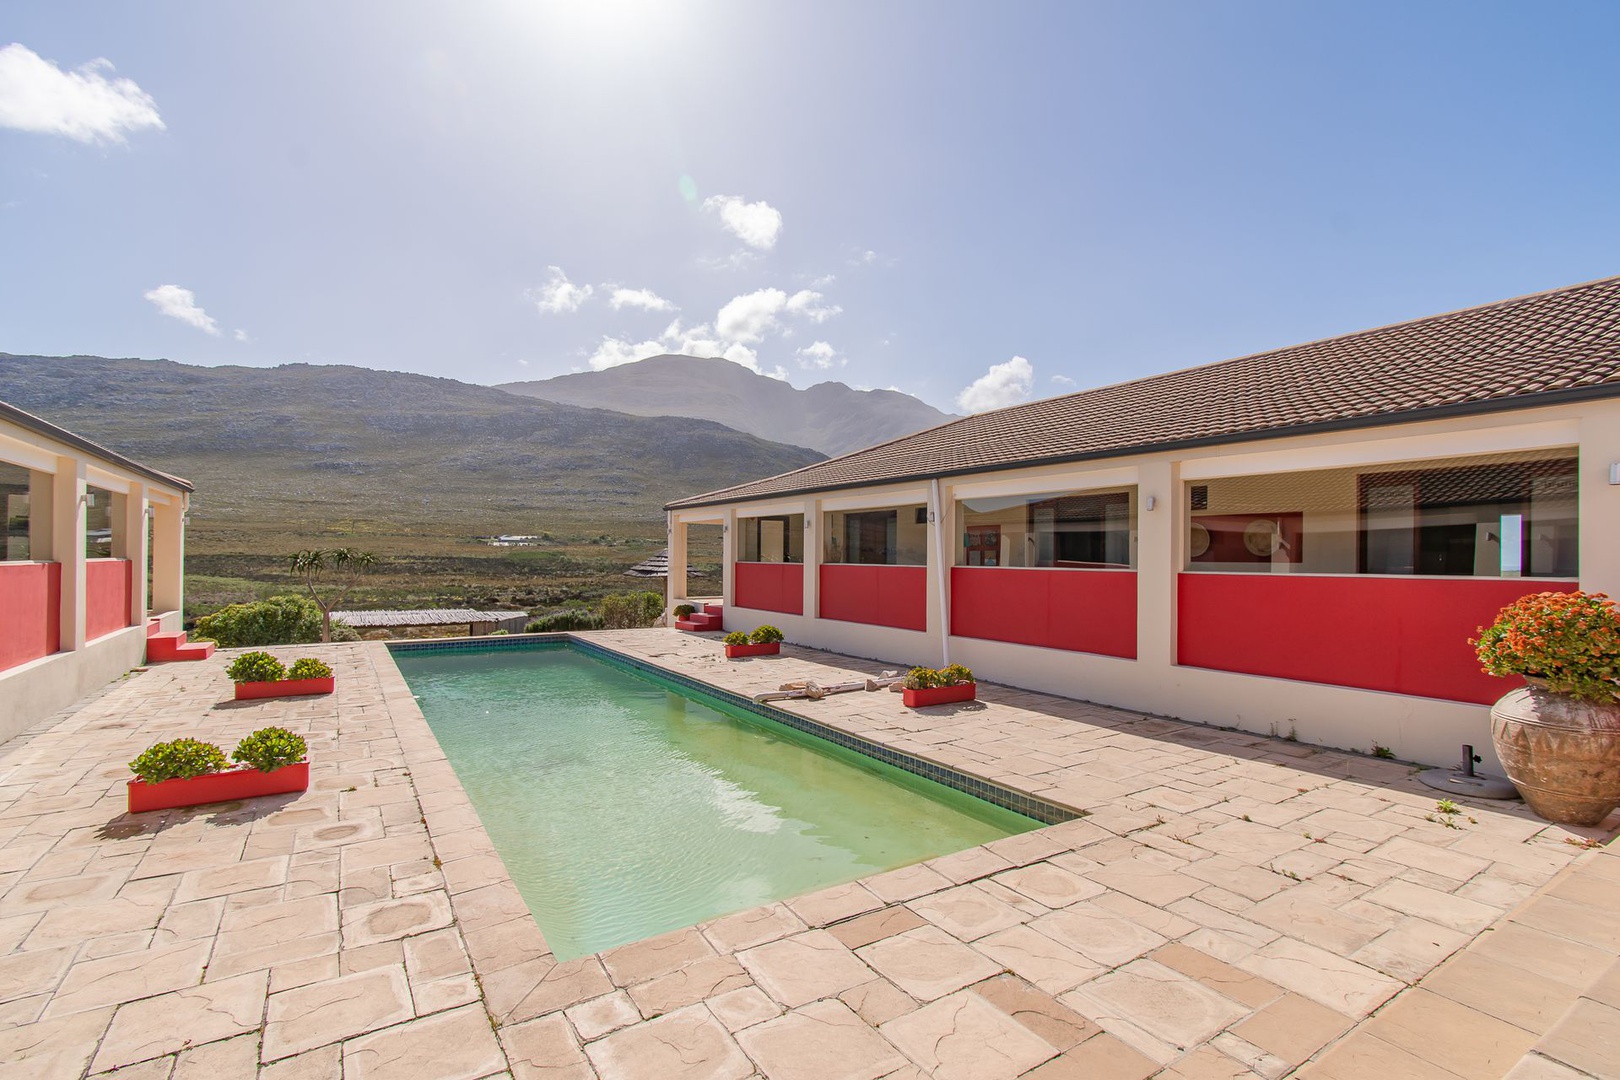 House in Pringle Bay Rural - Laze around the pool or enjoy a leisurely swim while taking in the views